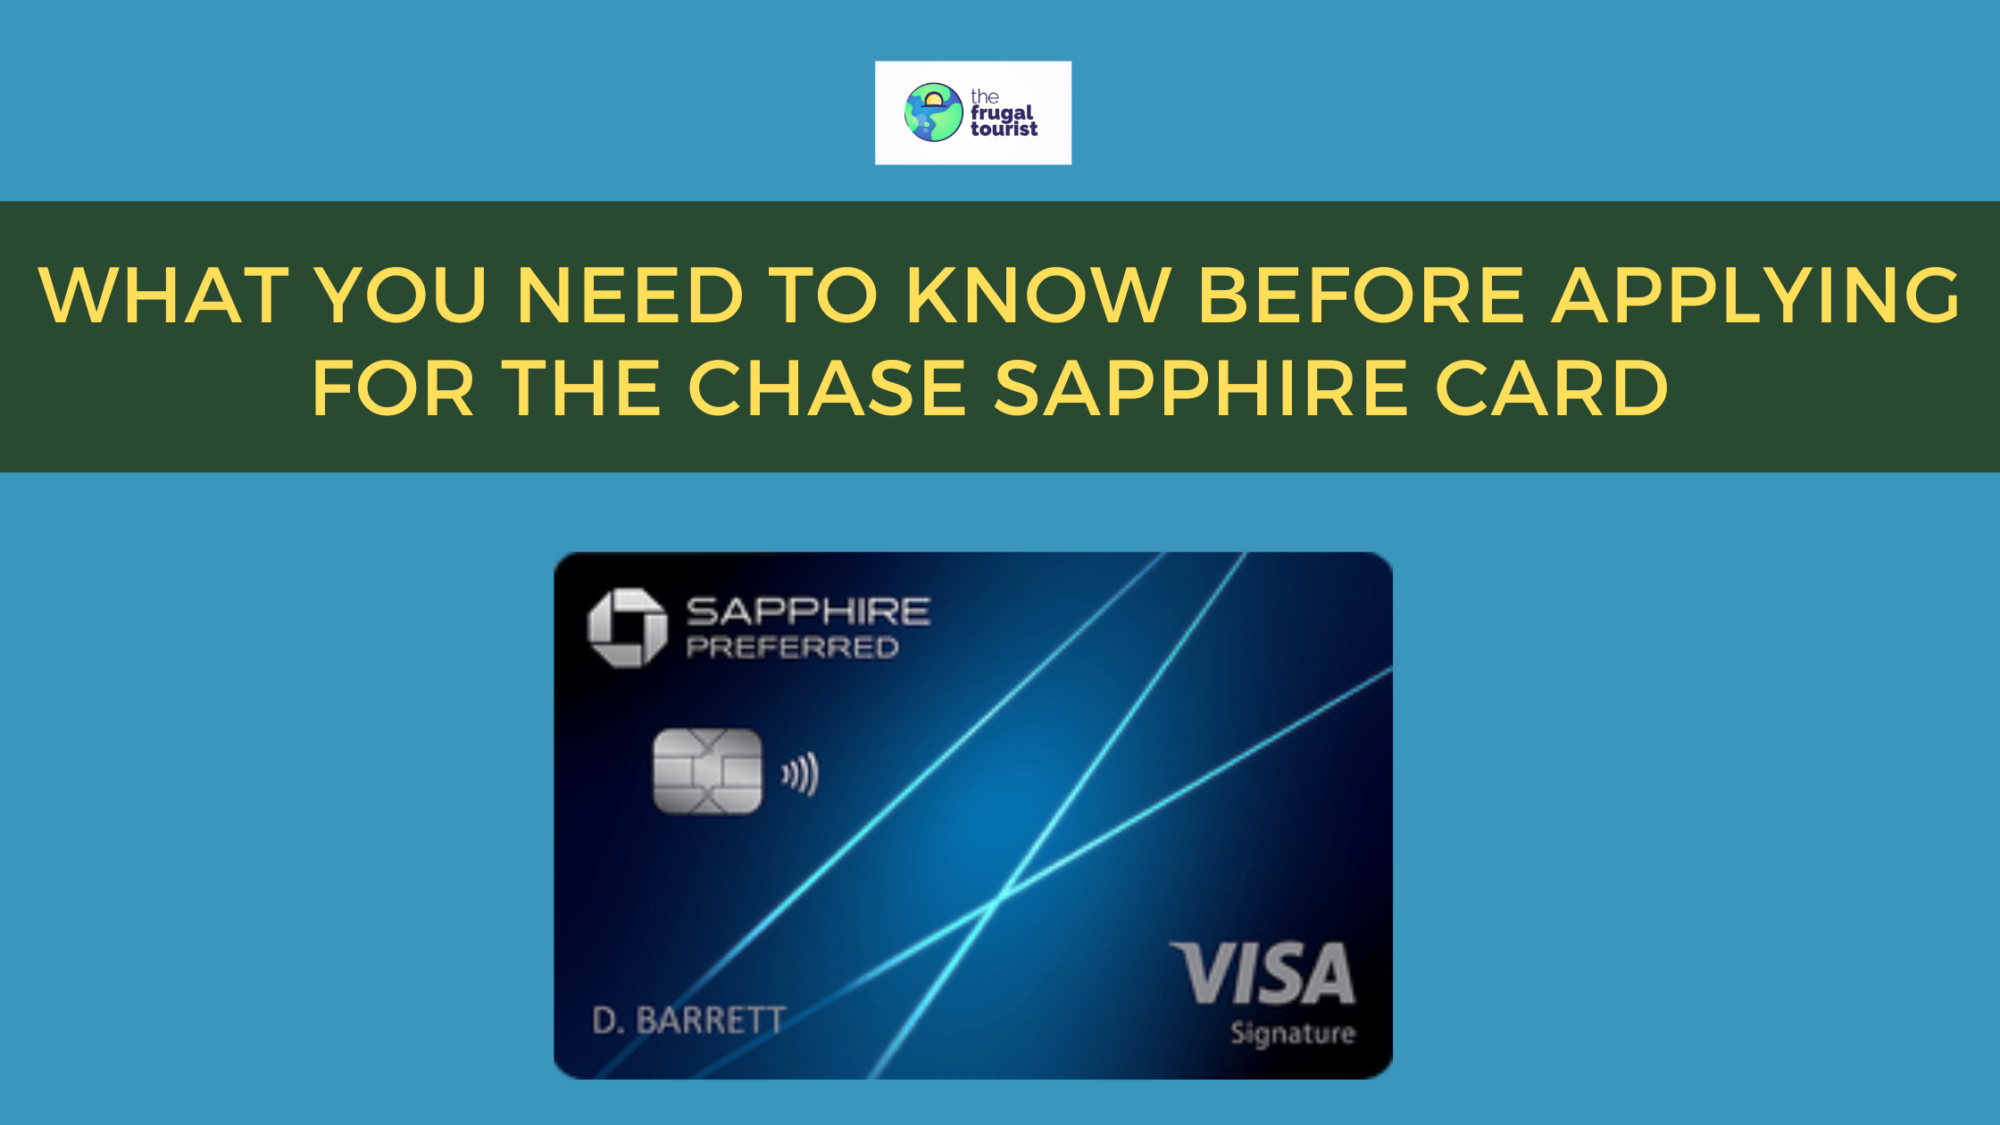 What You Need to Know Before Applying for the Chase Sapphire Card